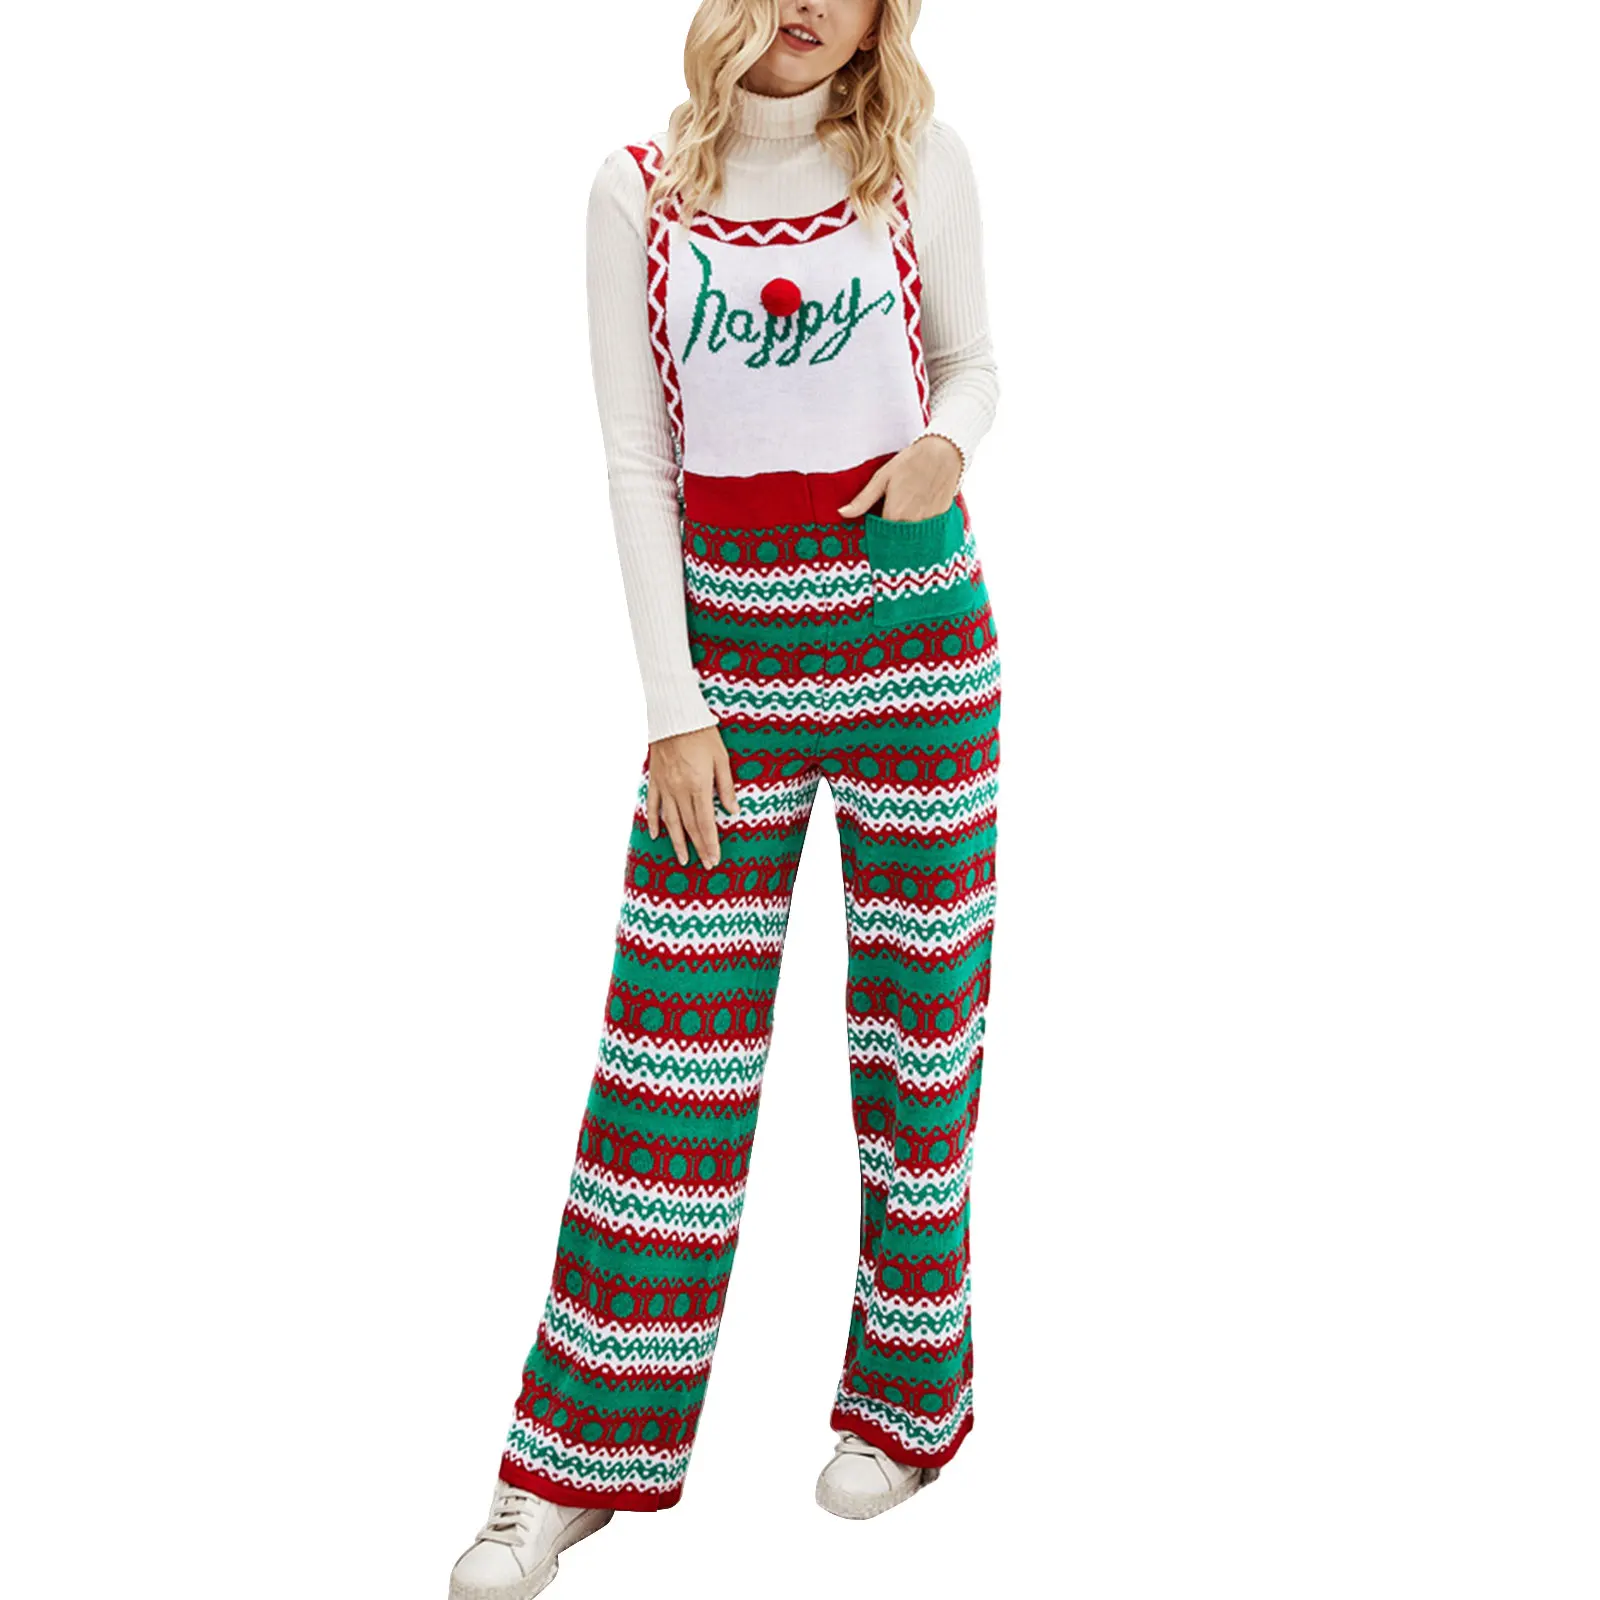 Women Christmas Knitted Bib Overalls Snowflake Print Loose Straight Leg Jumpsuit Romper Pants with Pockets New Year Clothes